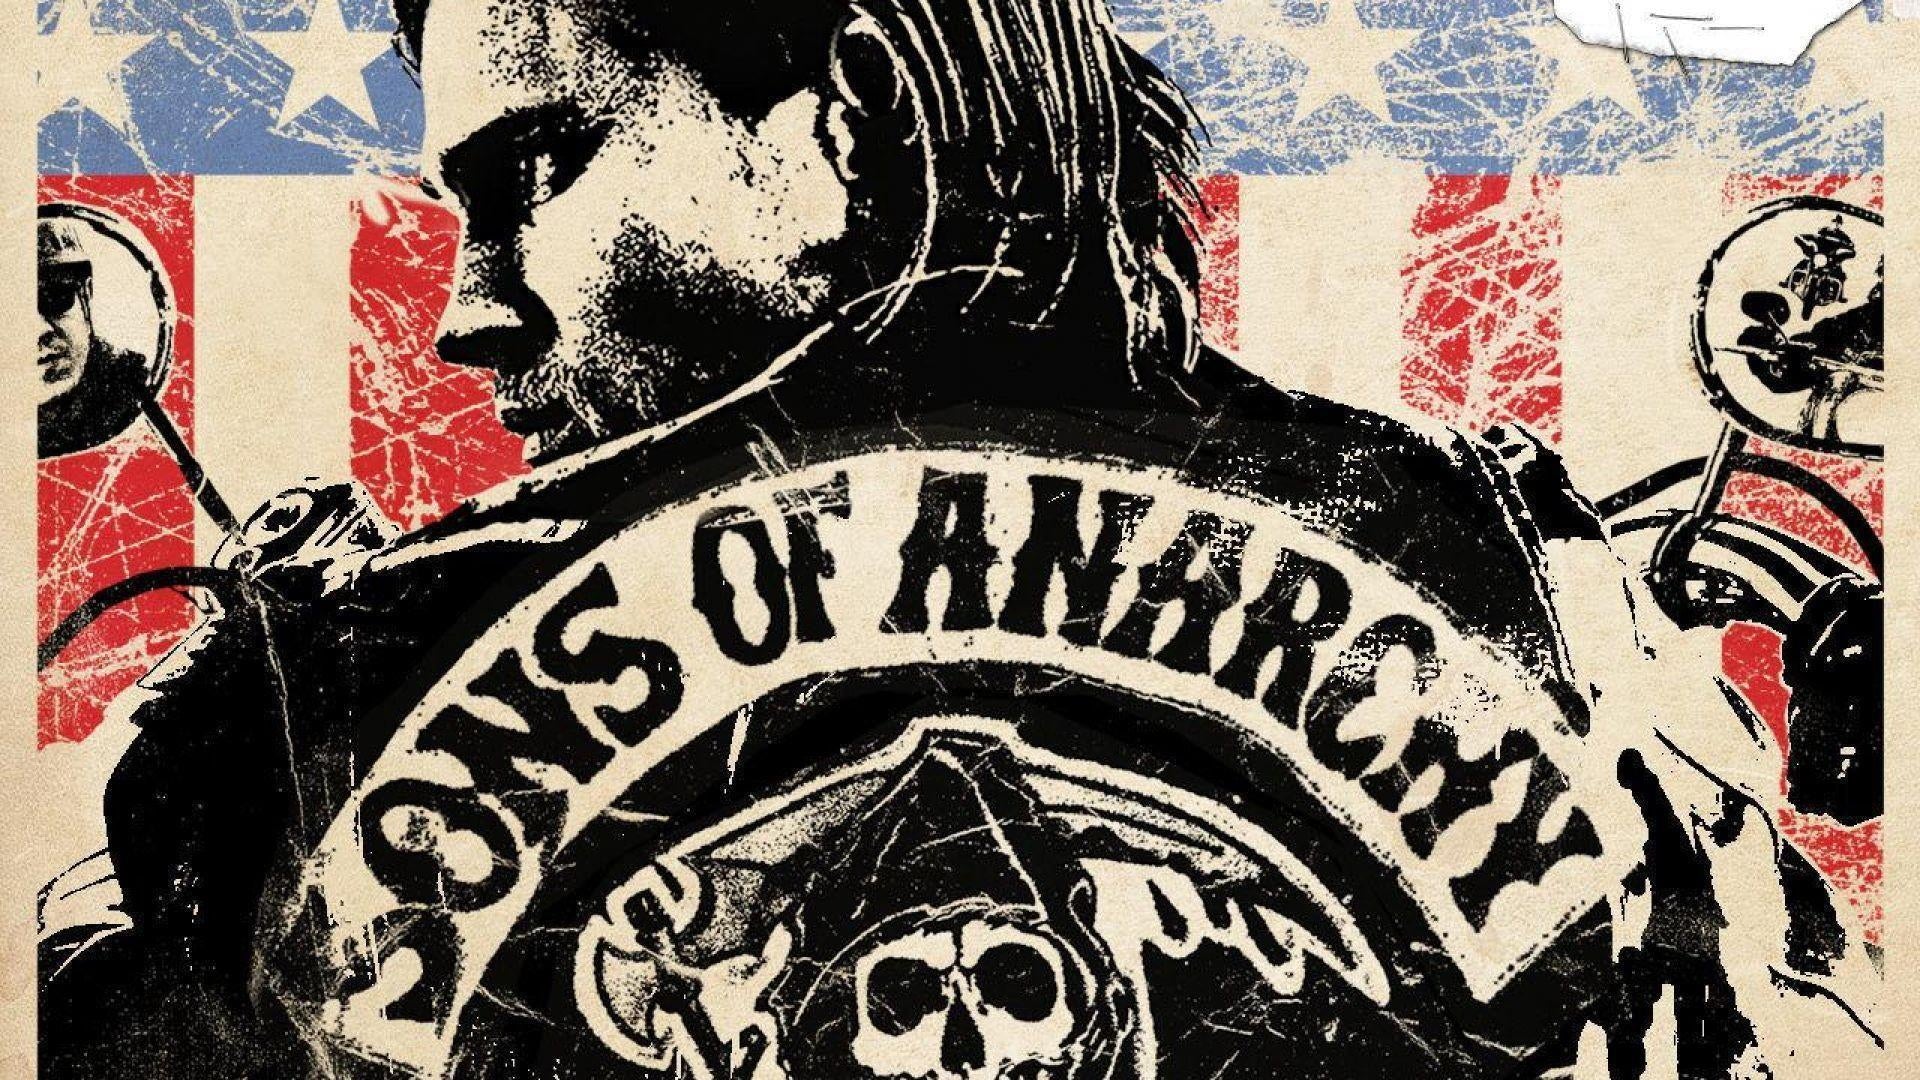 Sons of Anarchy: The Complete Series - Seasons 1-7